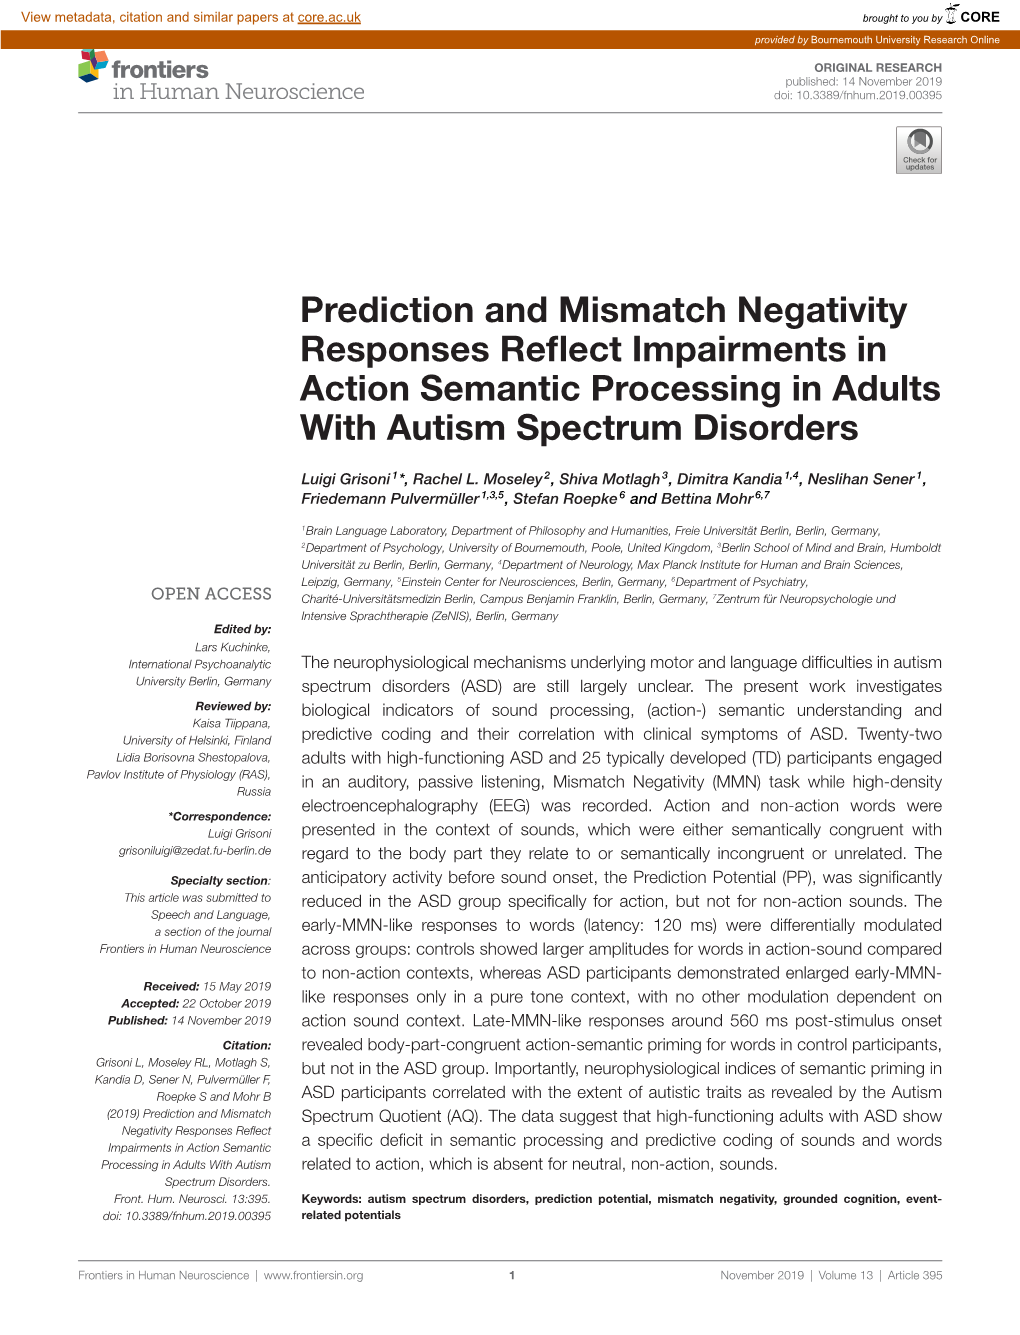 Prediction and Mismatch Negativity Responses Reflect Impairments in Action Semantic Processing in Adults with Autism Spectrum Di